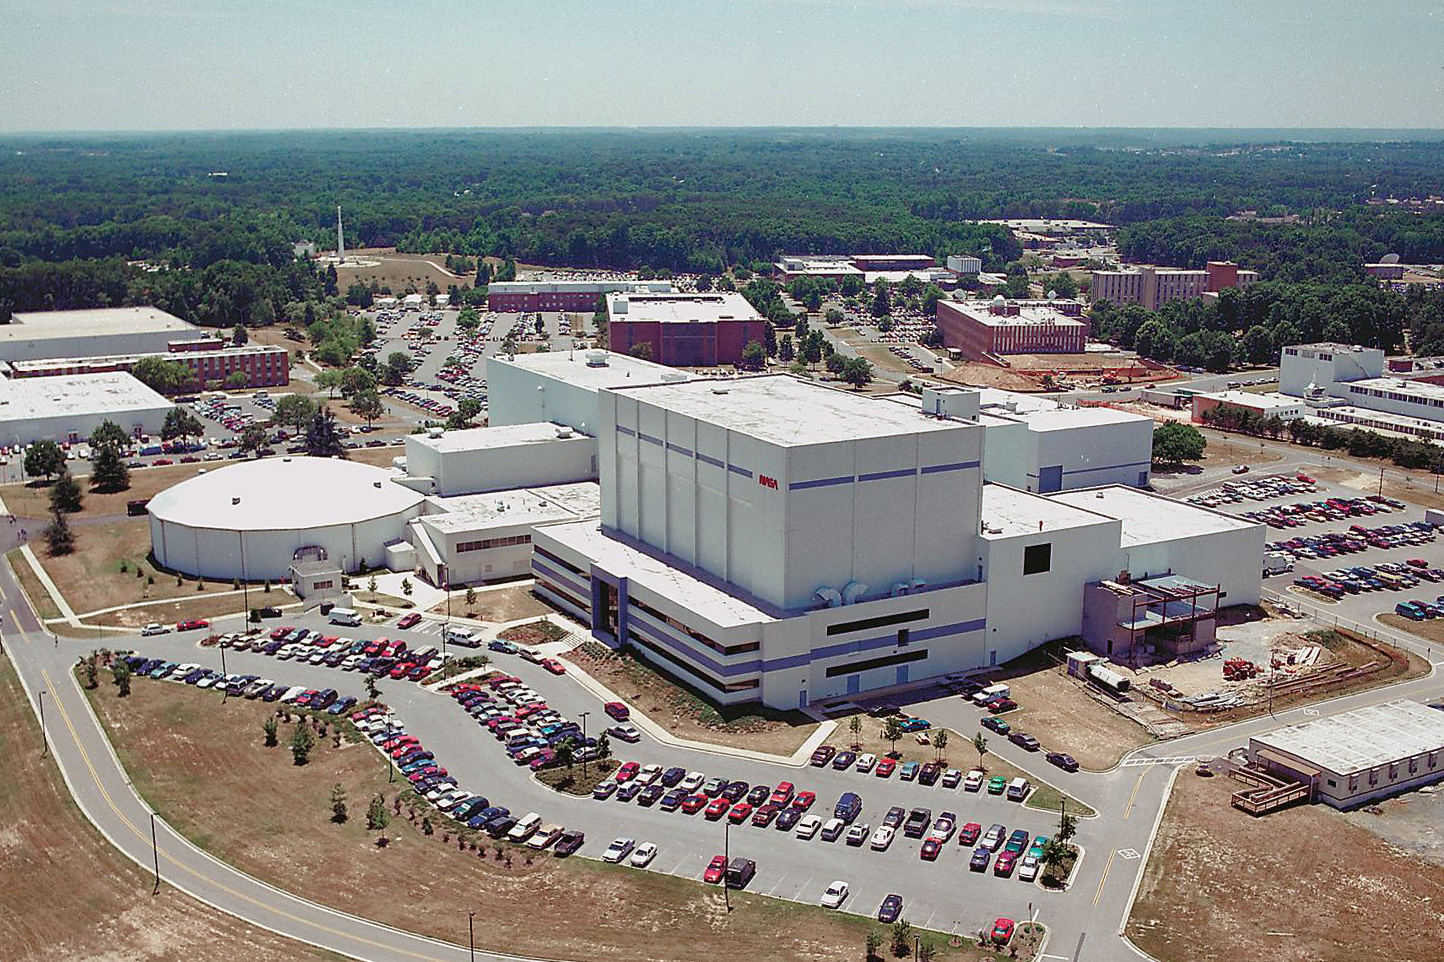 An aerial view of NASA's starship factory. Image by NASA Goddard Space Flight Center / CC BY 2.0